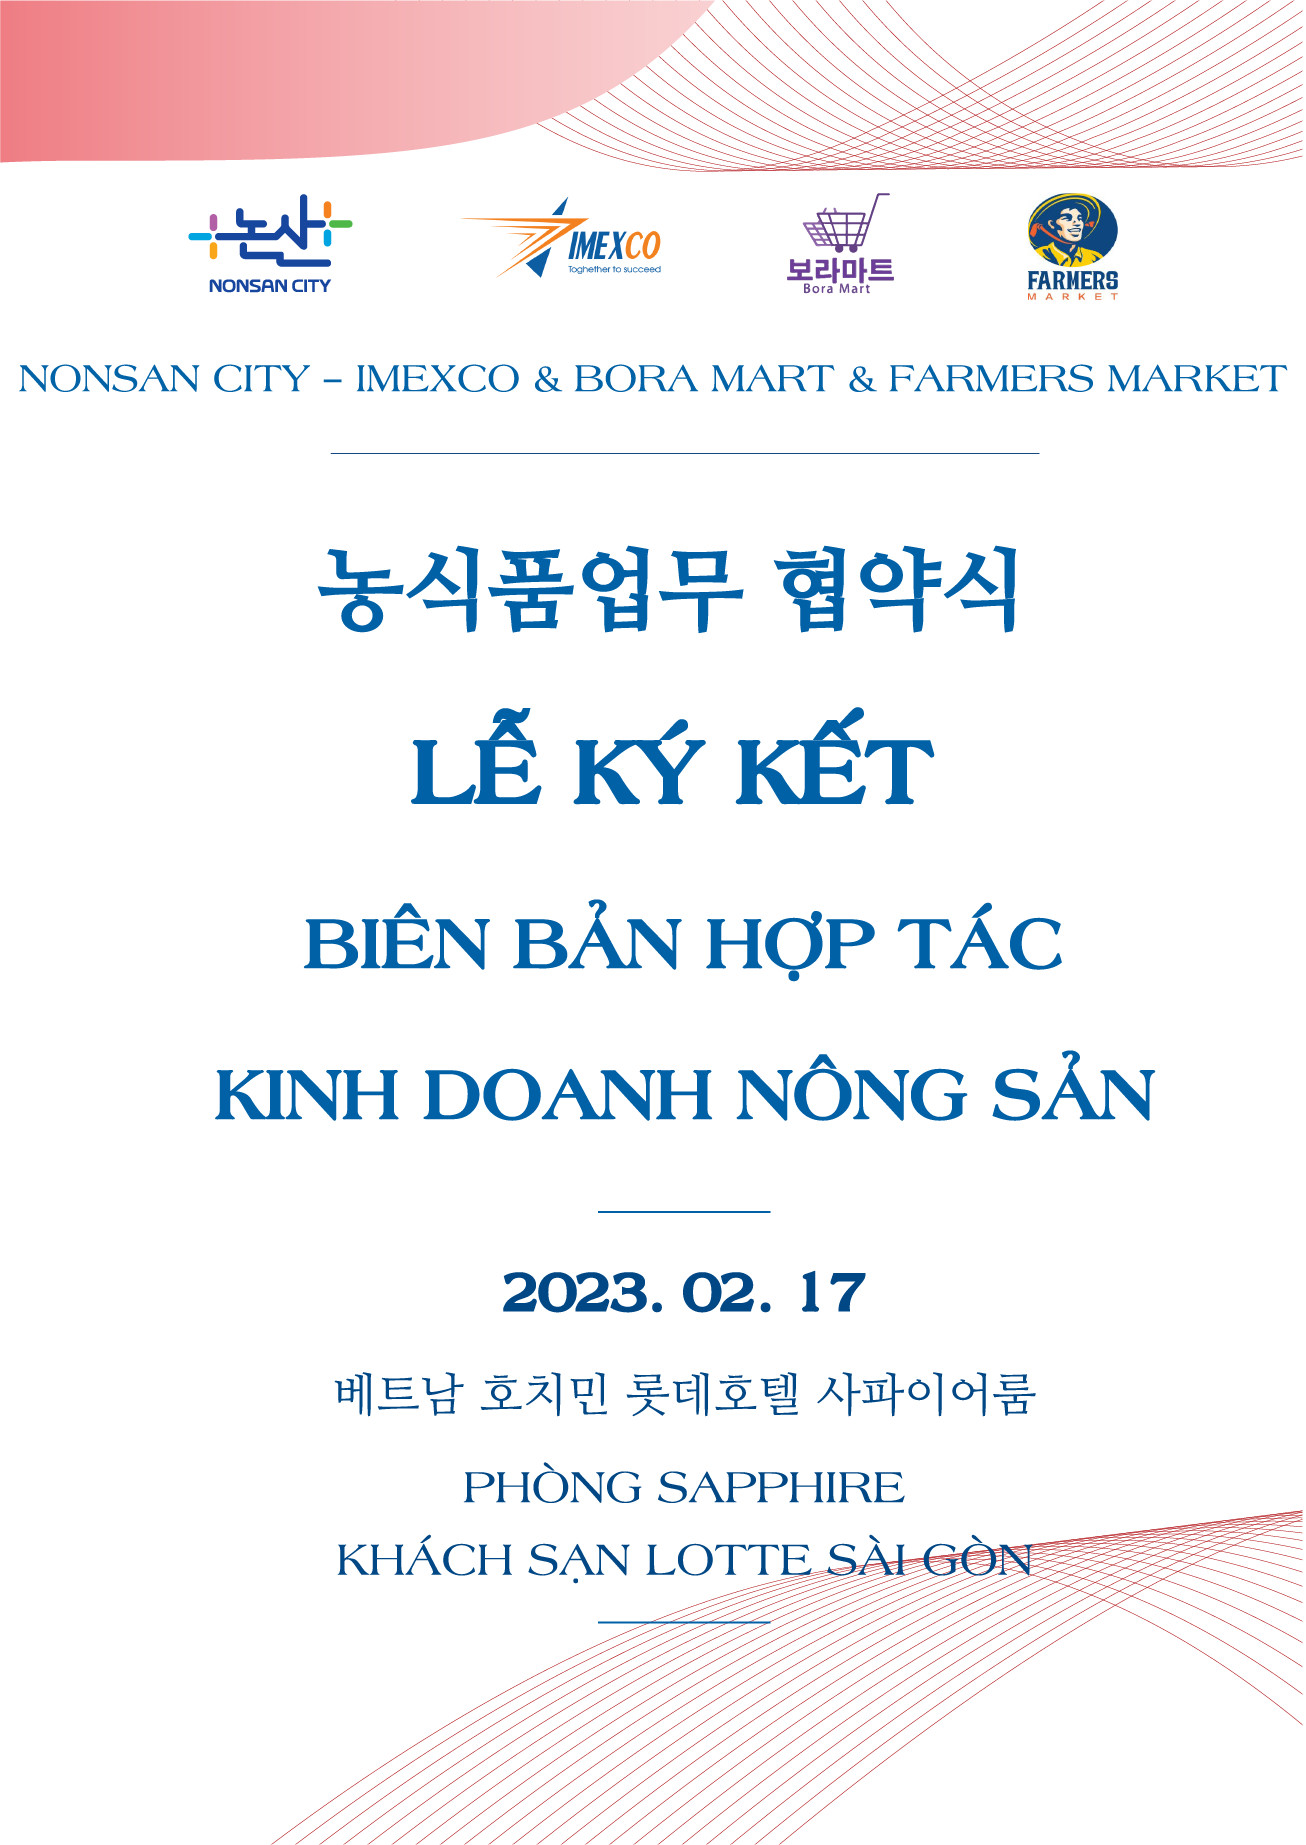 MOU CEREMONY BETWEEN NONSAN CITY AND ANNAM GOURMET, IMEXCO AND FARMERS MARKET IN HO CHI MINH CITY